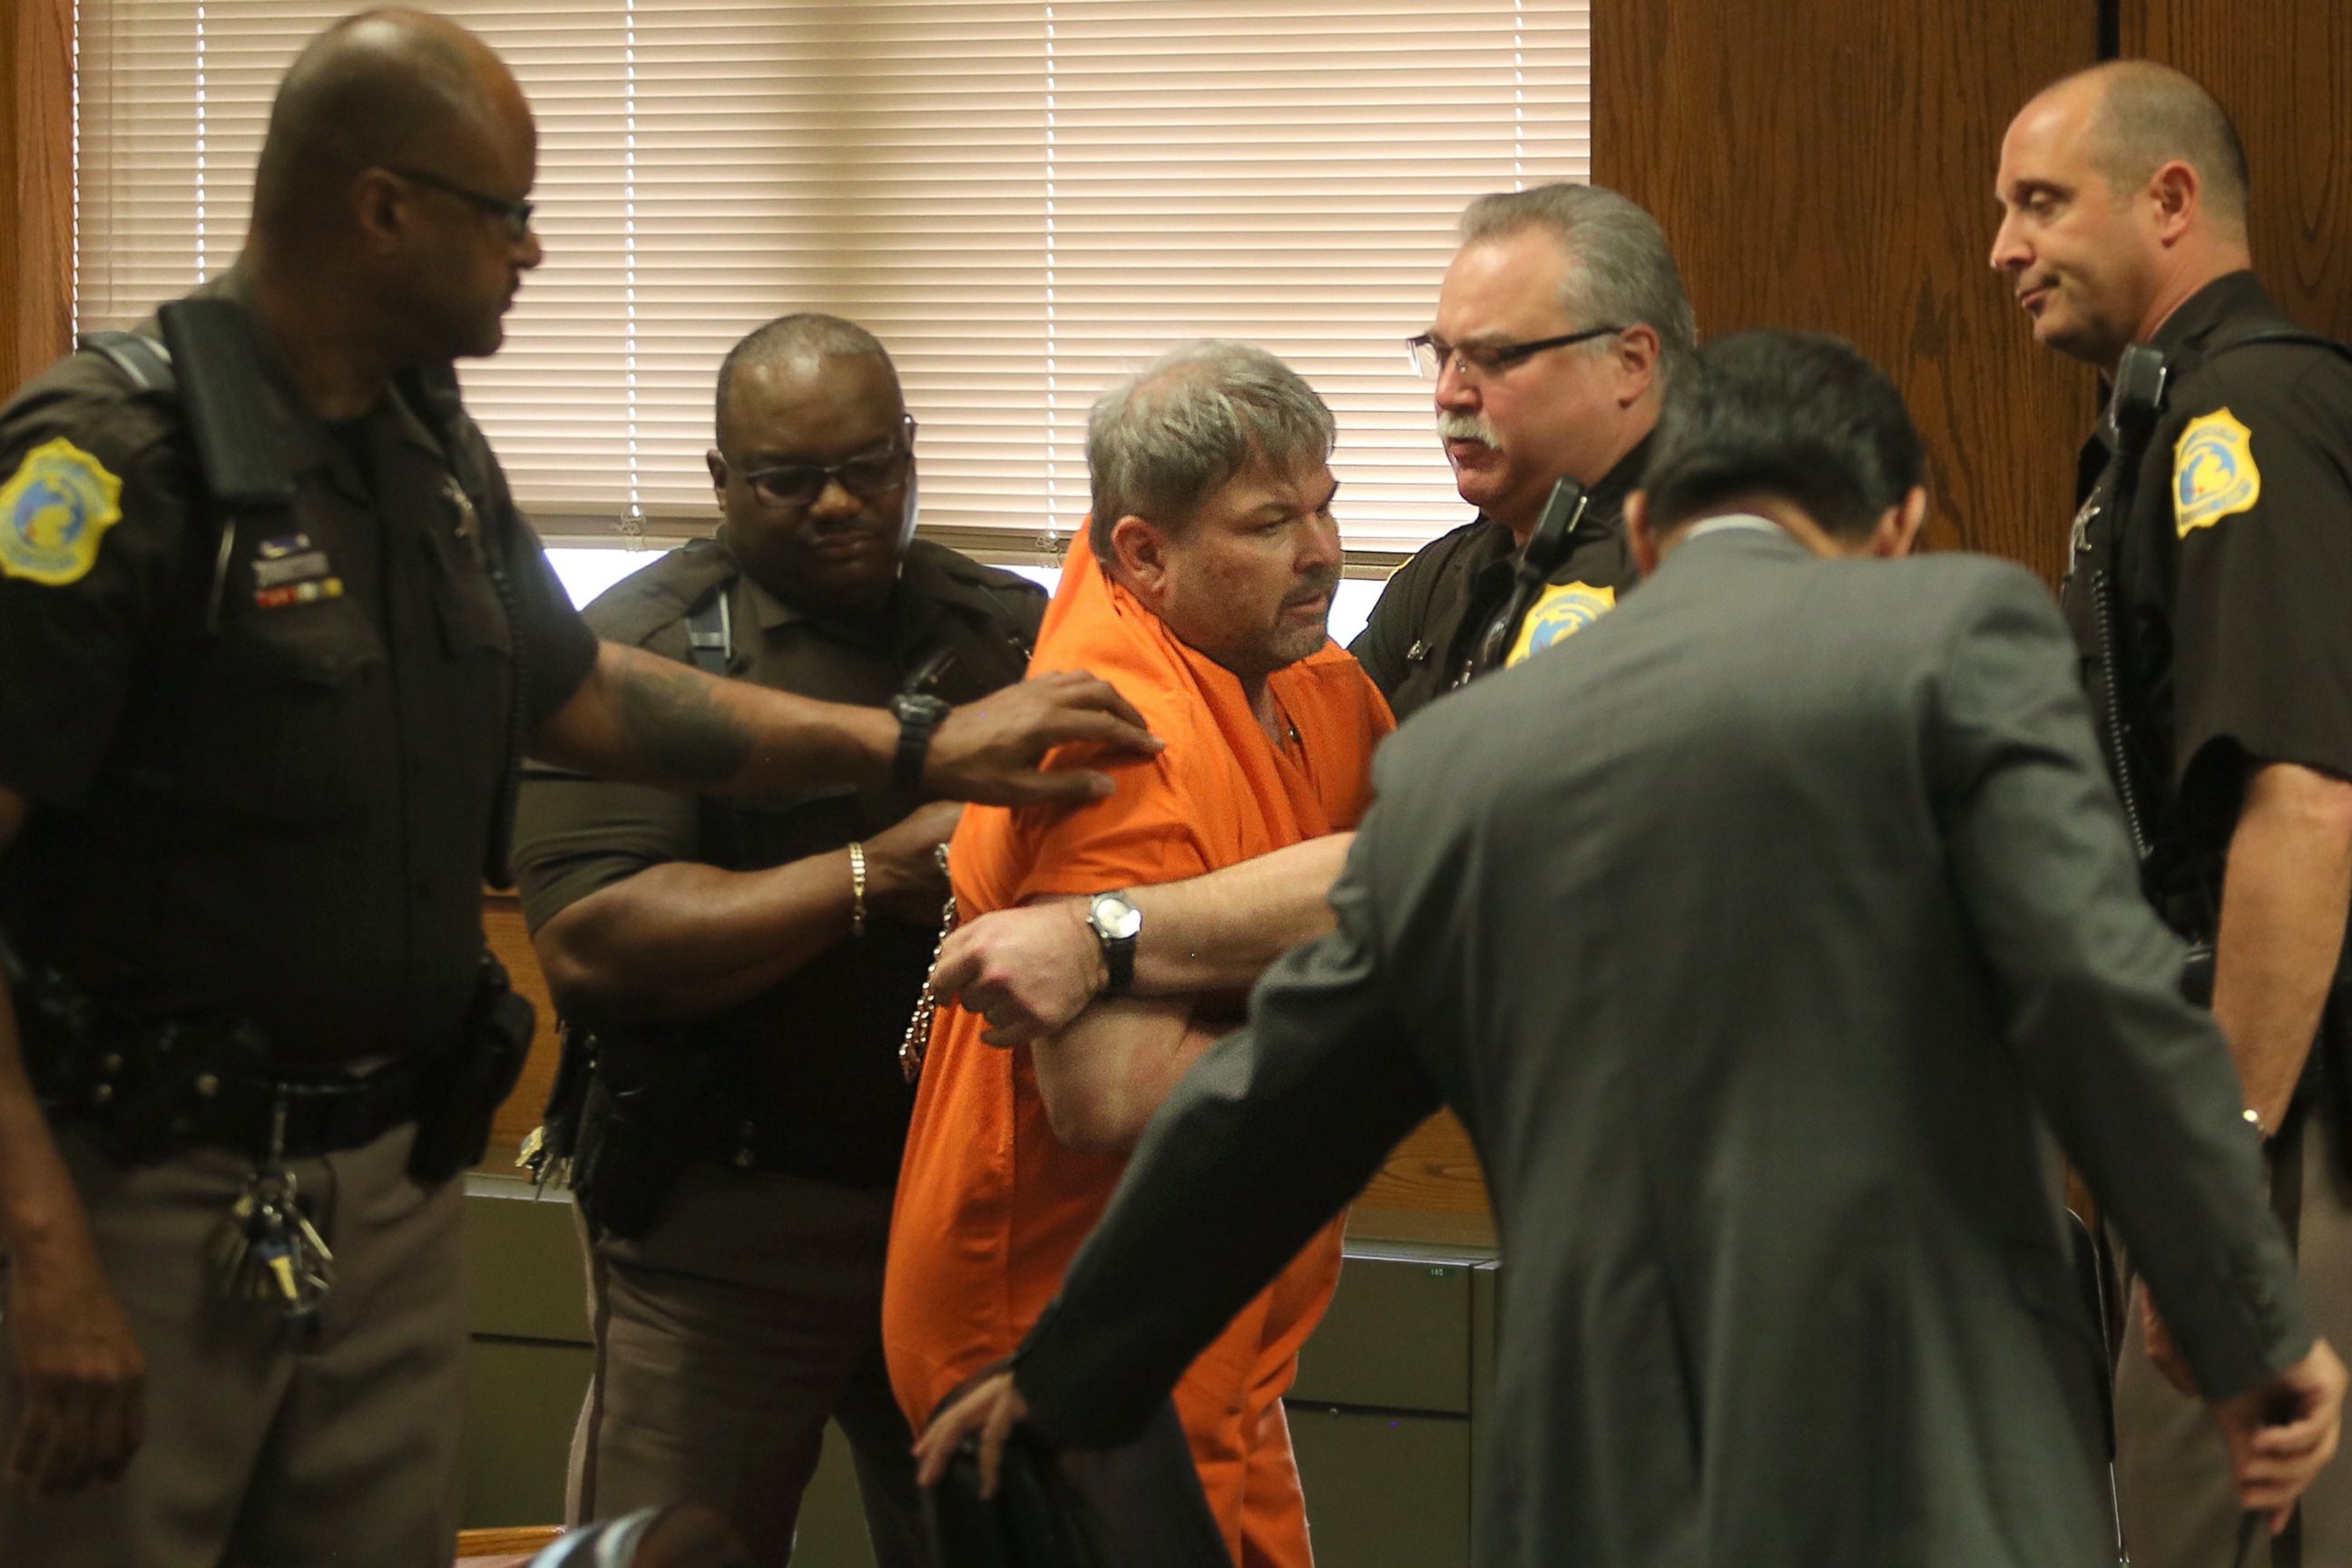 PHOTO: Kalamazoo County Deputies remove Jason Dalton after an outburst during his preliminary examination in district court on Friday, May 20, 2016 in Kalamazoo, Mich.